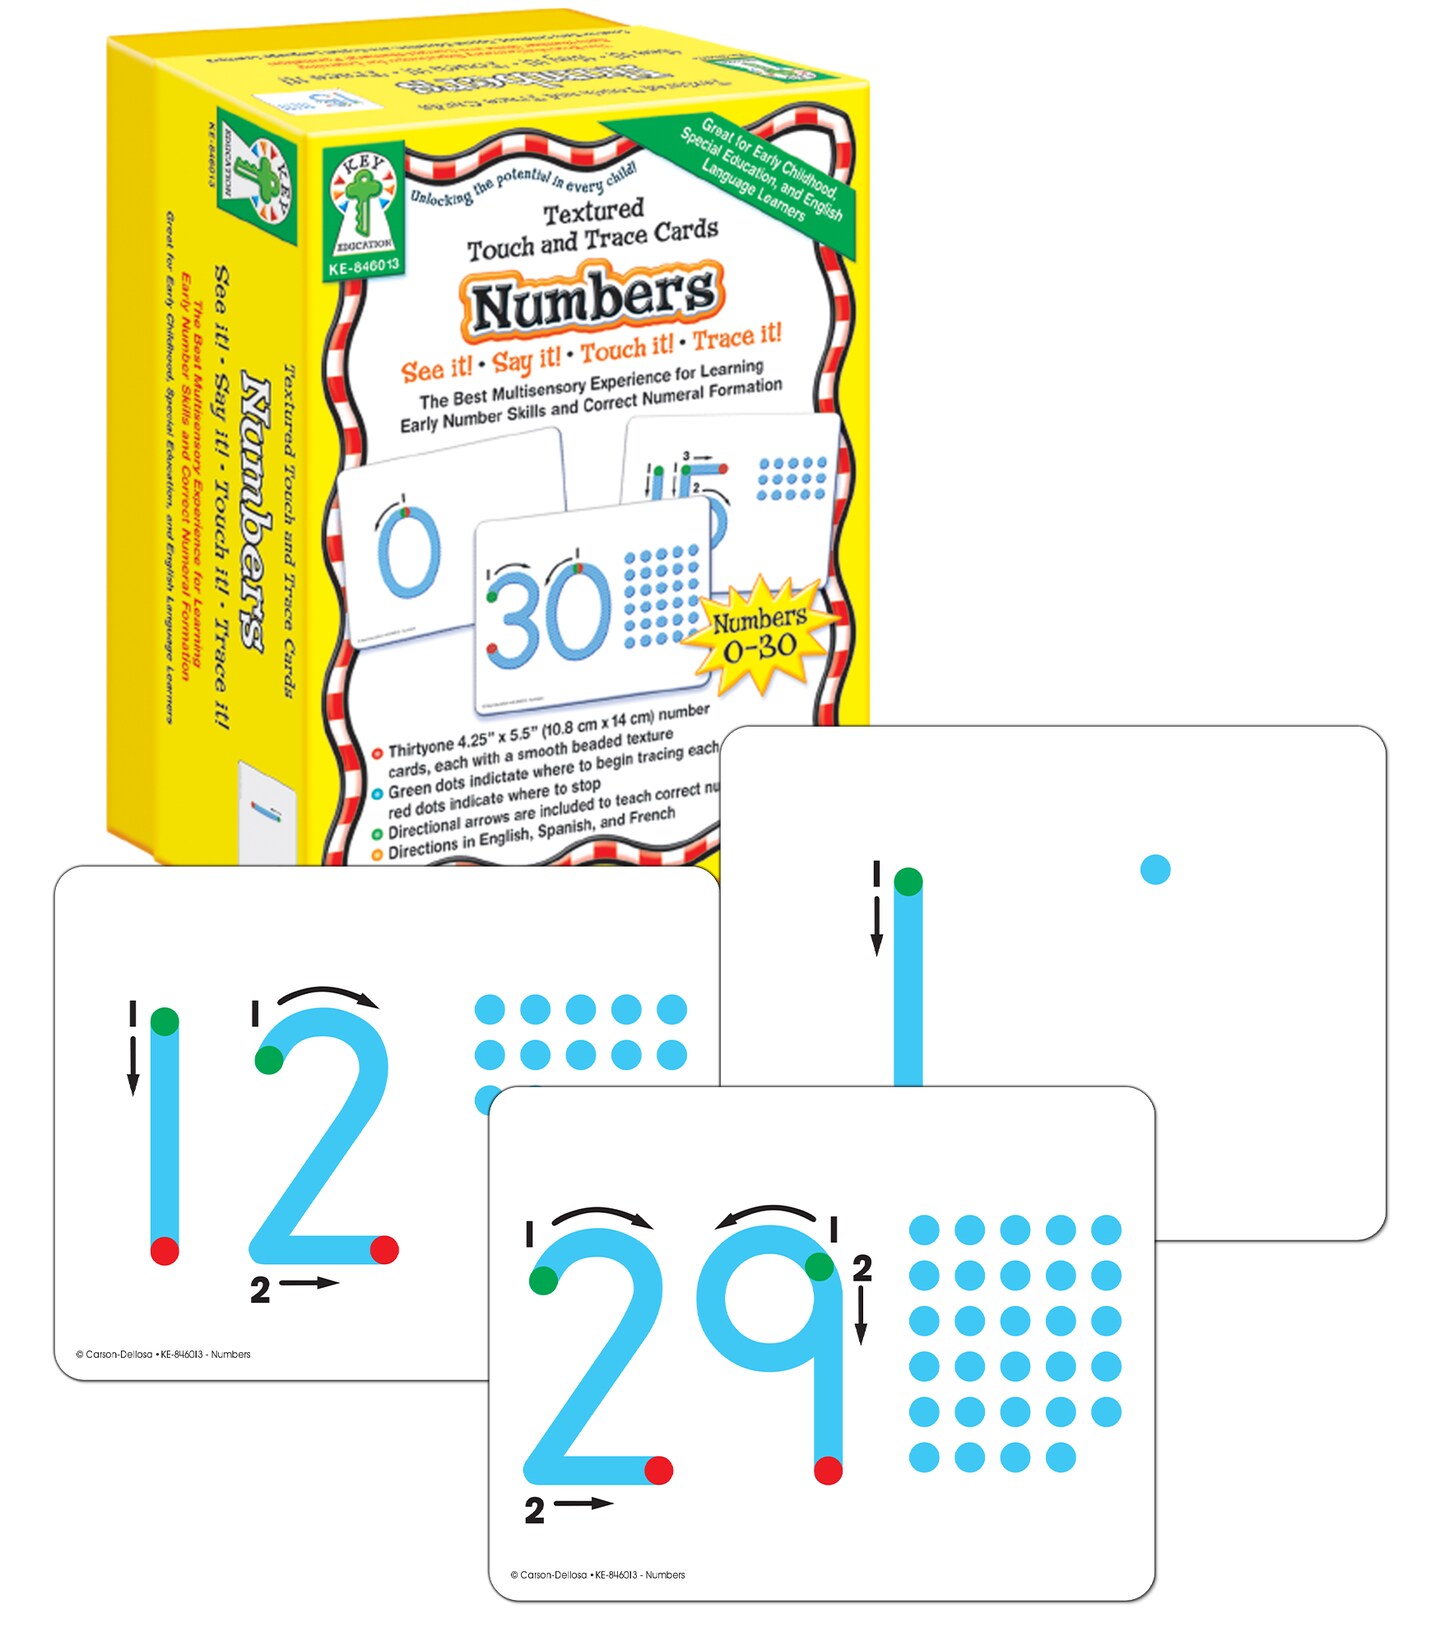 Numbers: Textured Touch and Trace Cards, Interactive Math Manipulatives With Dots for Tracing, Large Numbers, Number Formations, and Counting, Ages 3+ (31 pc)